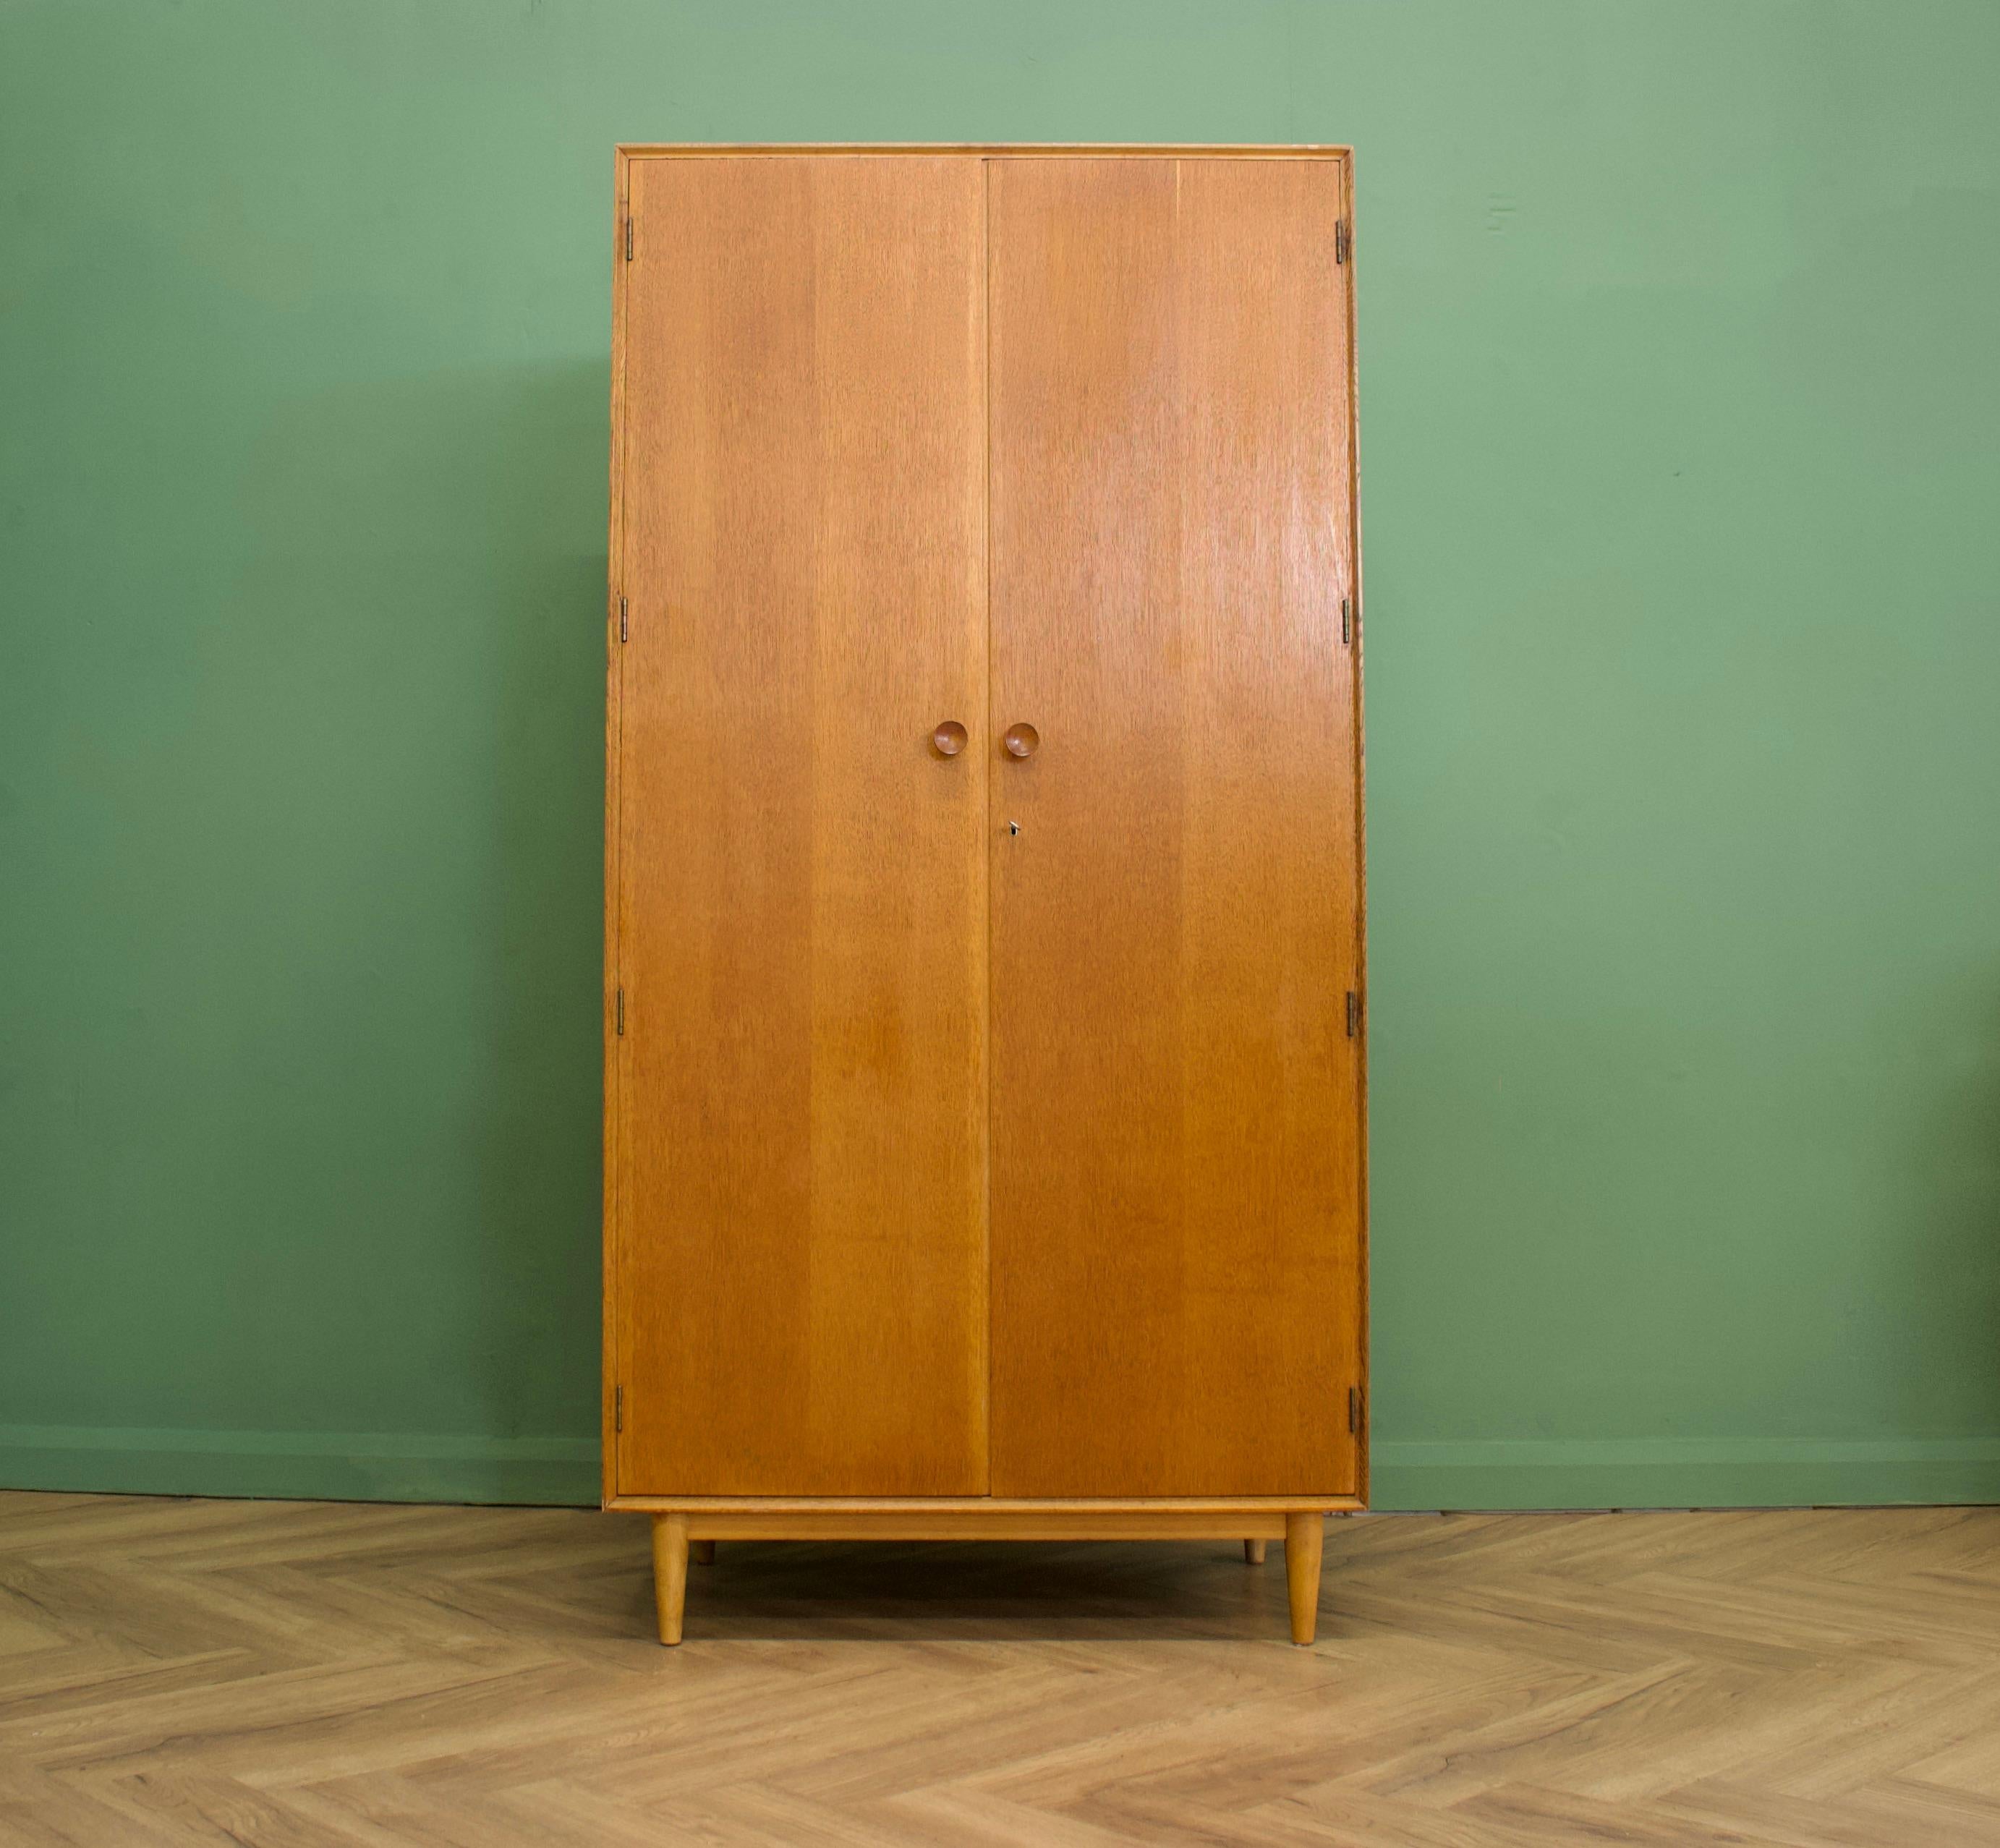 Midcentury wardrobe
Manufactured in the UK by Meredew
Made from oak and oak veneer.

Featuring solid oak handles two rails and a two adjustable and removable shelves.